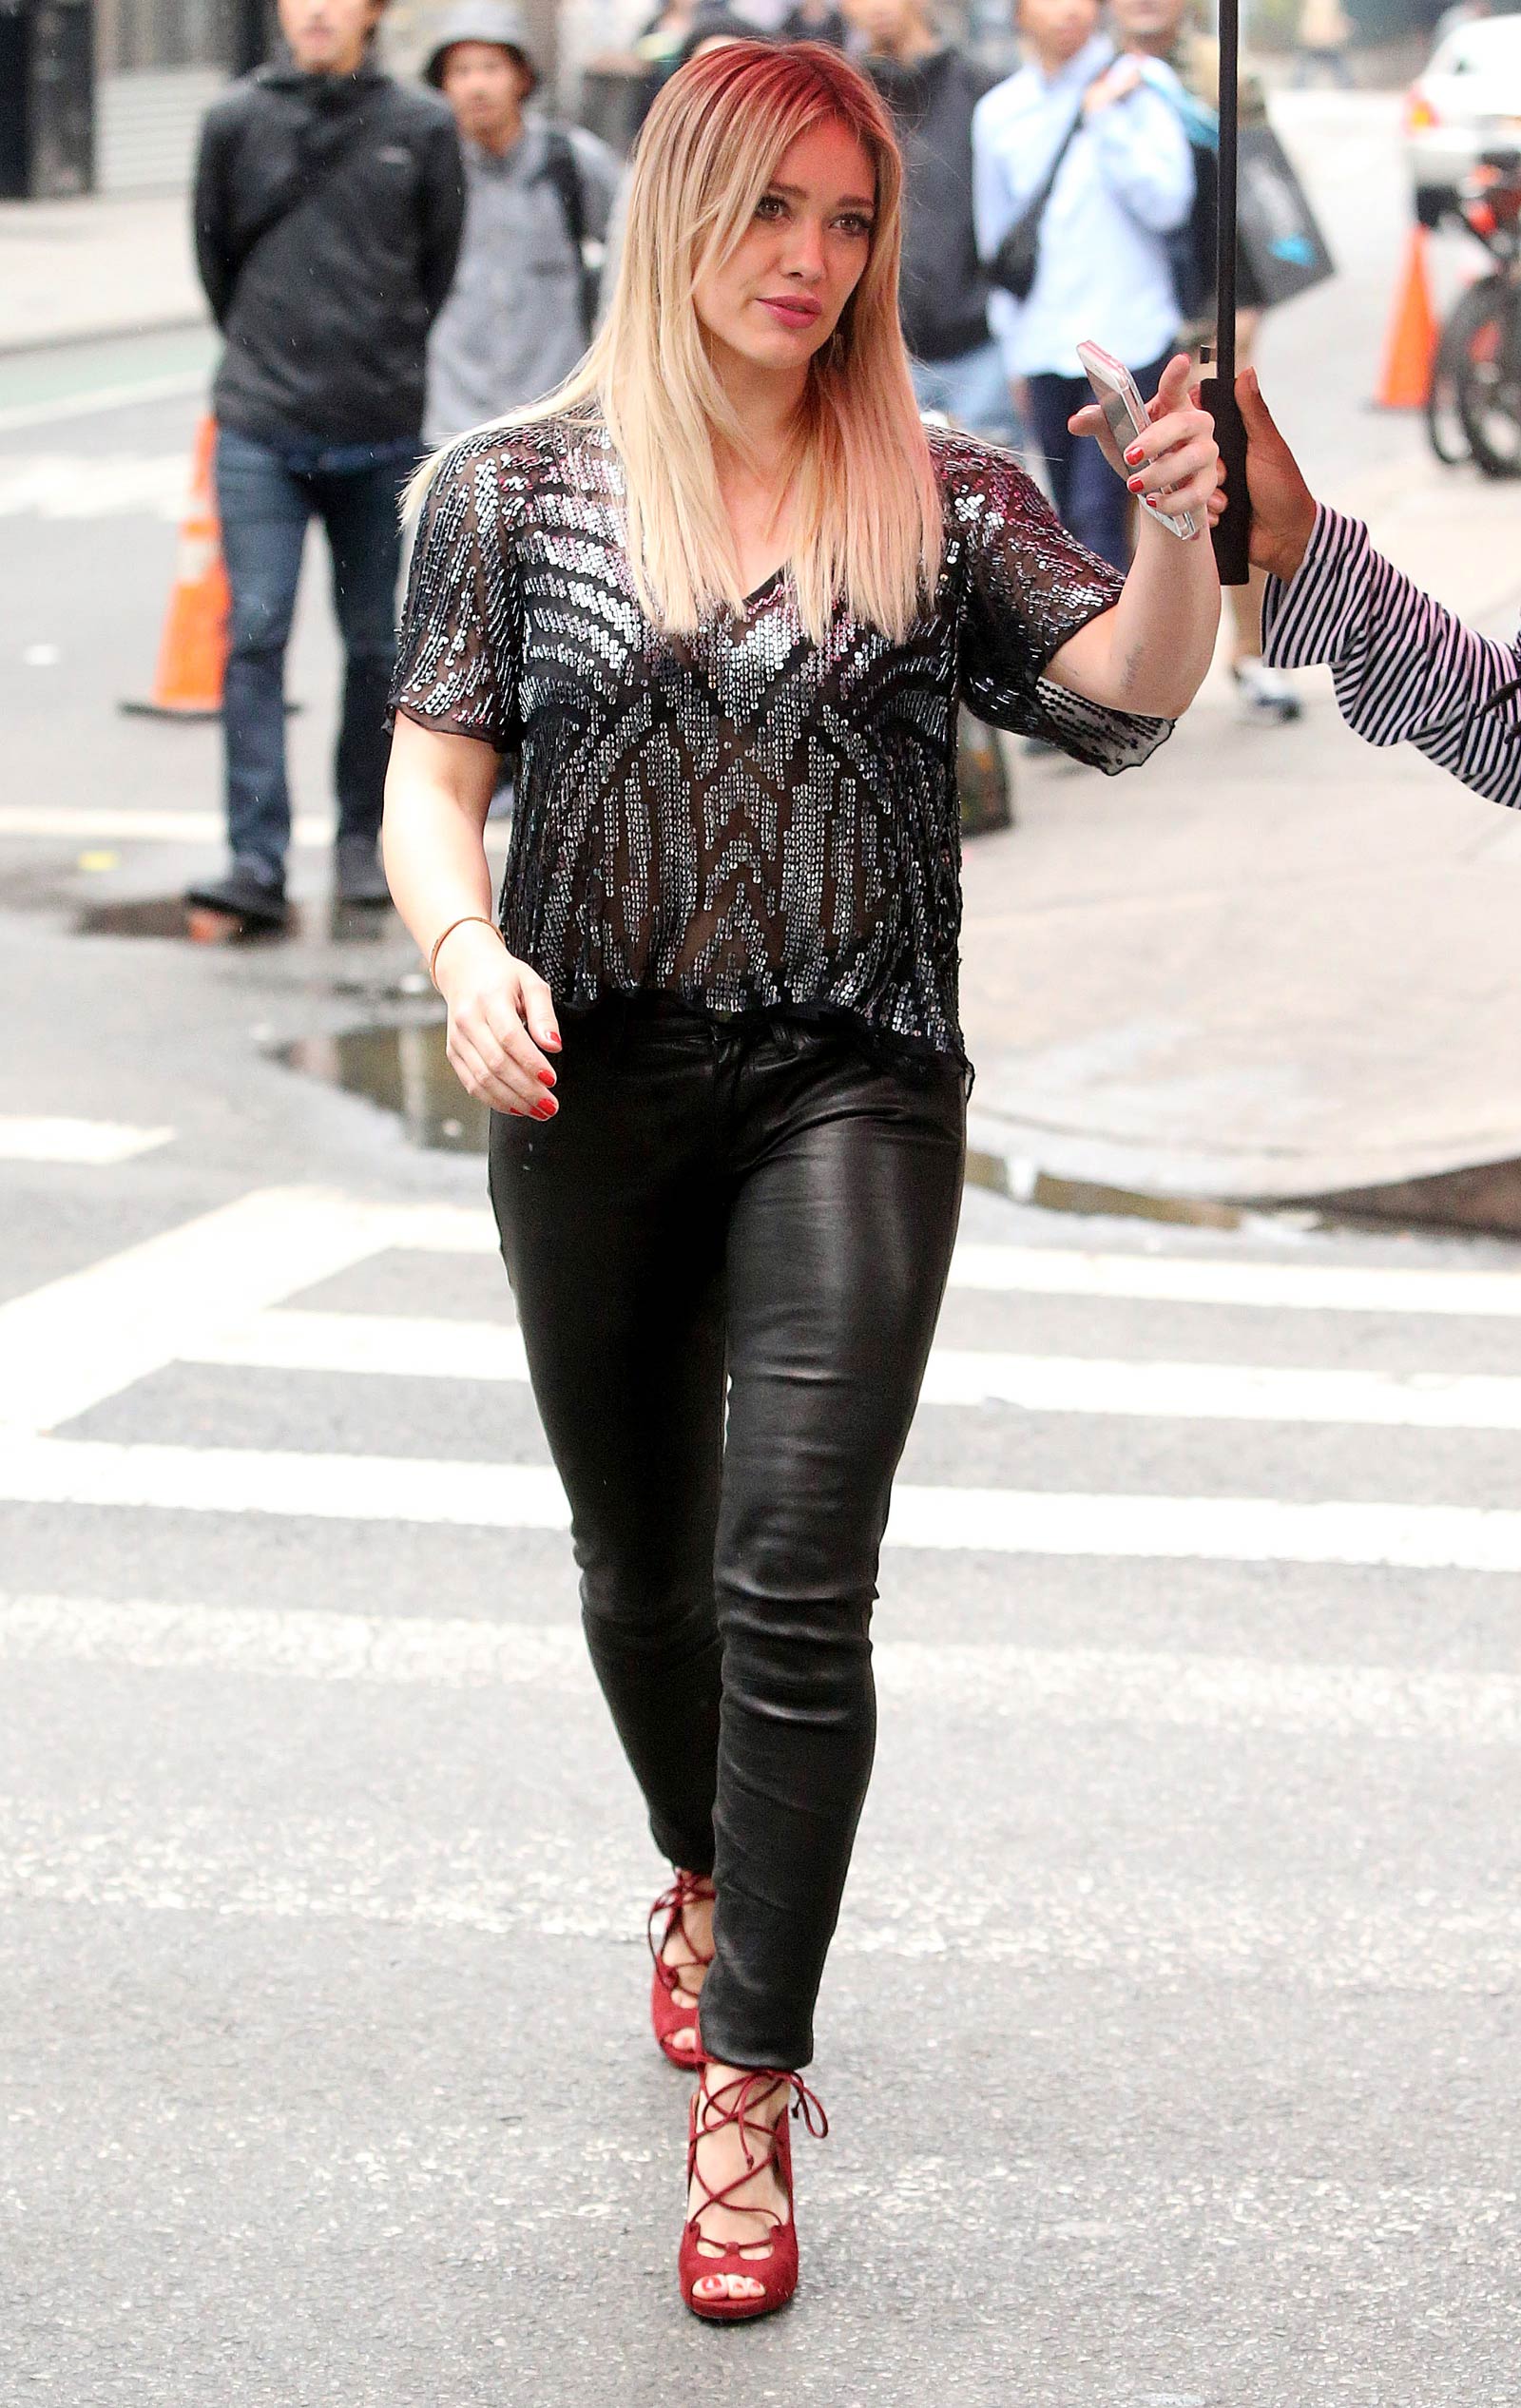 Hilary Duff on the set of Younger